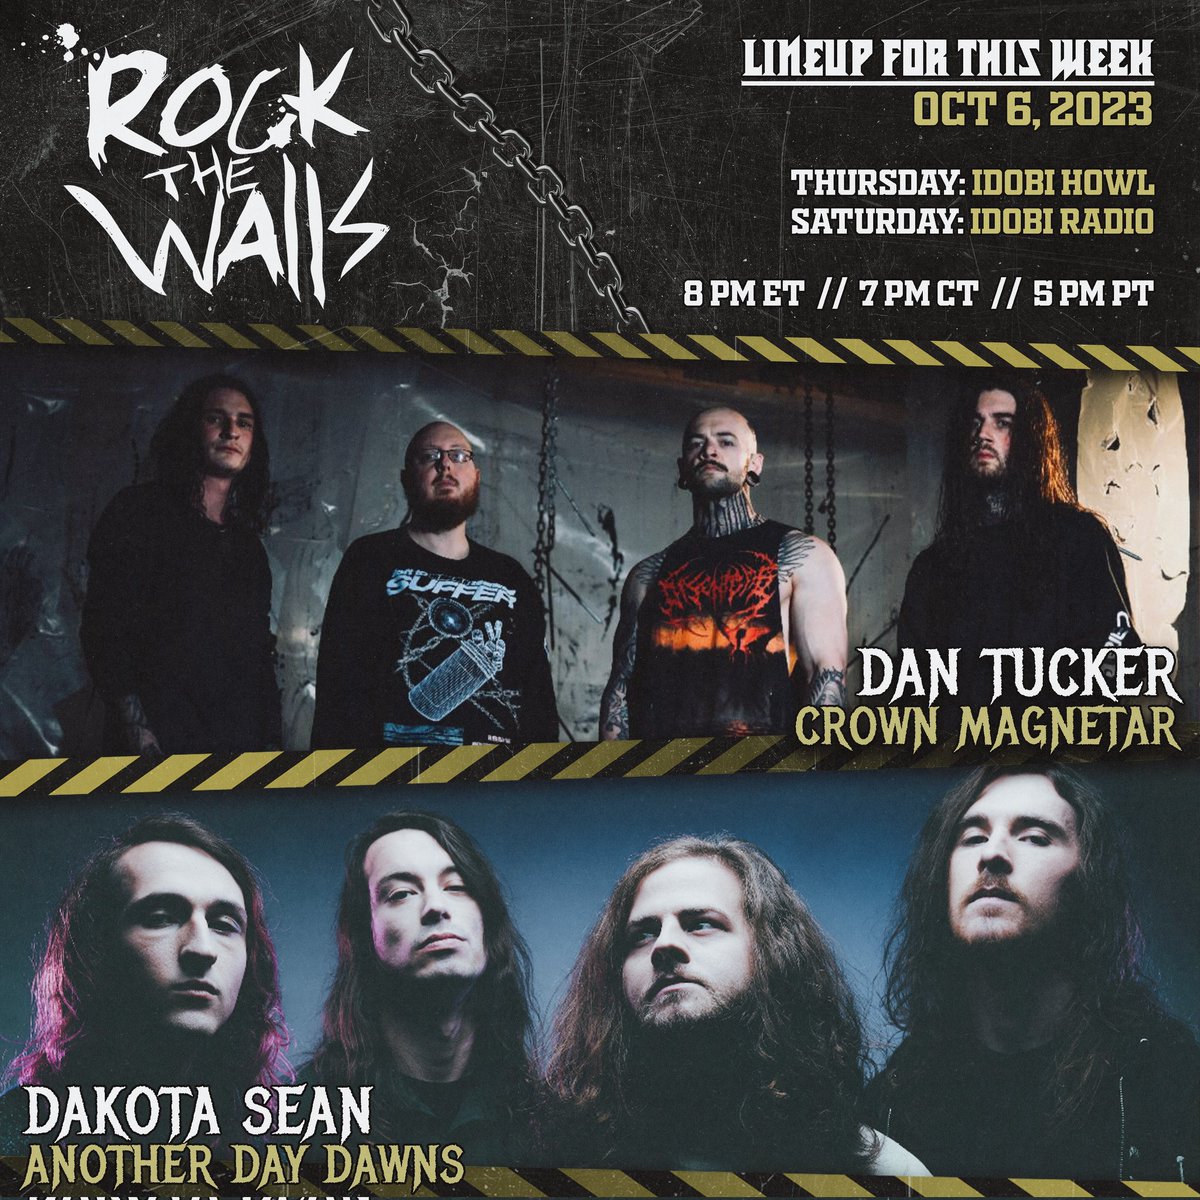 Tonight on @rockthewalls @ 8pmET! @dancrown_ of @CrownMagnetar & Dakota Sean of @an0therdaydawns to talk all about & spin tracks from their new albums!